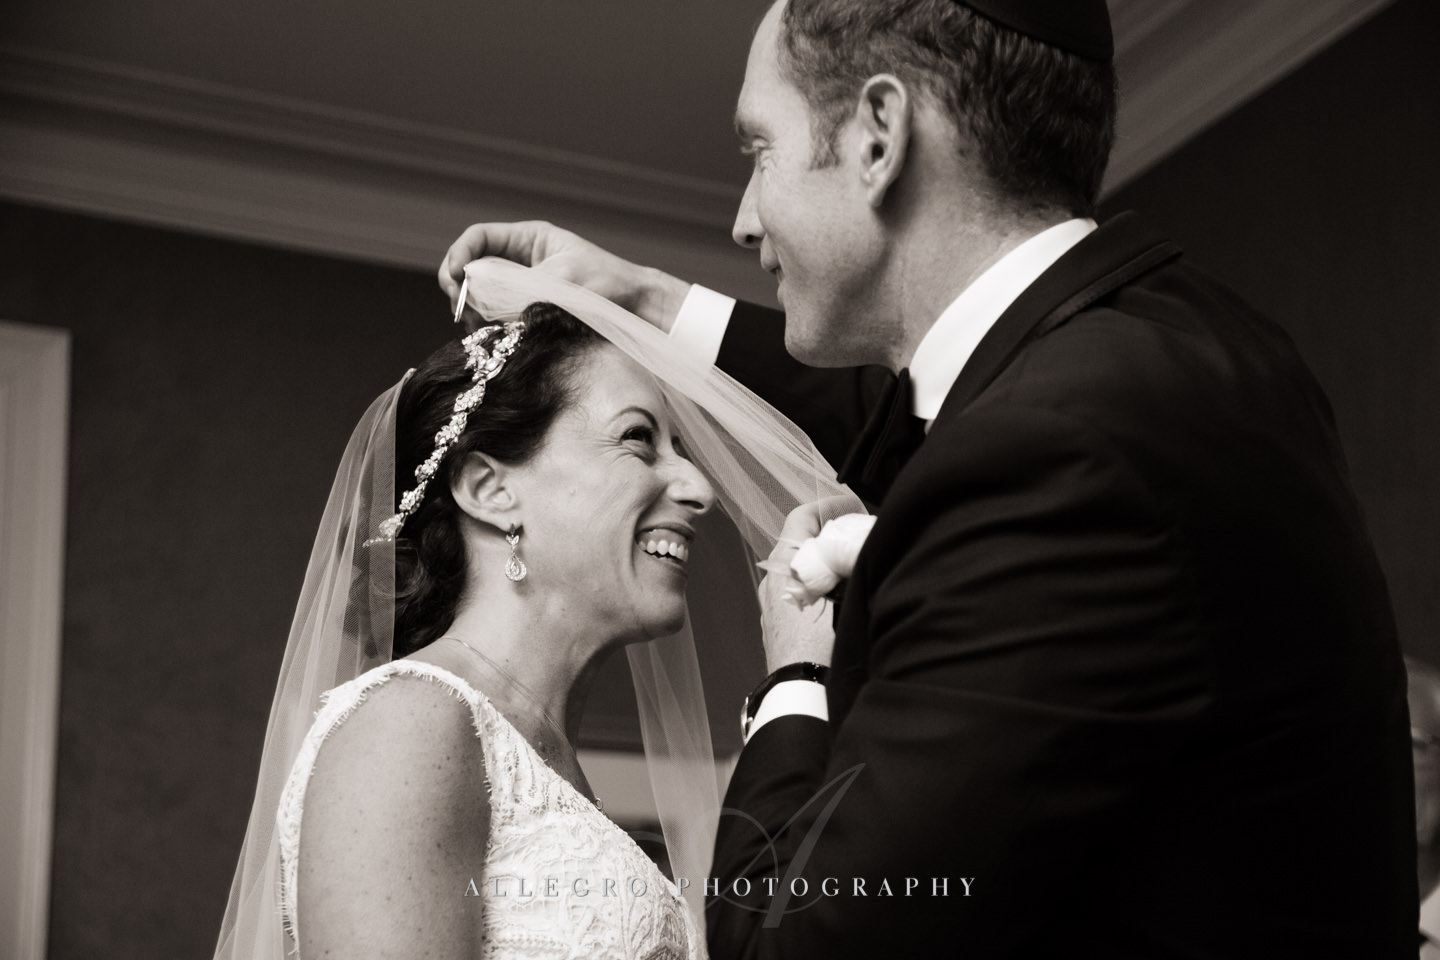 bedecken - putting on the veil jewish tradition -photo by Allegro Photography